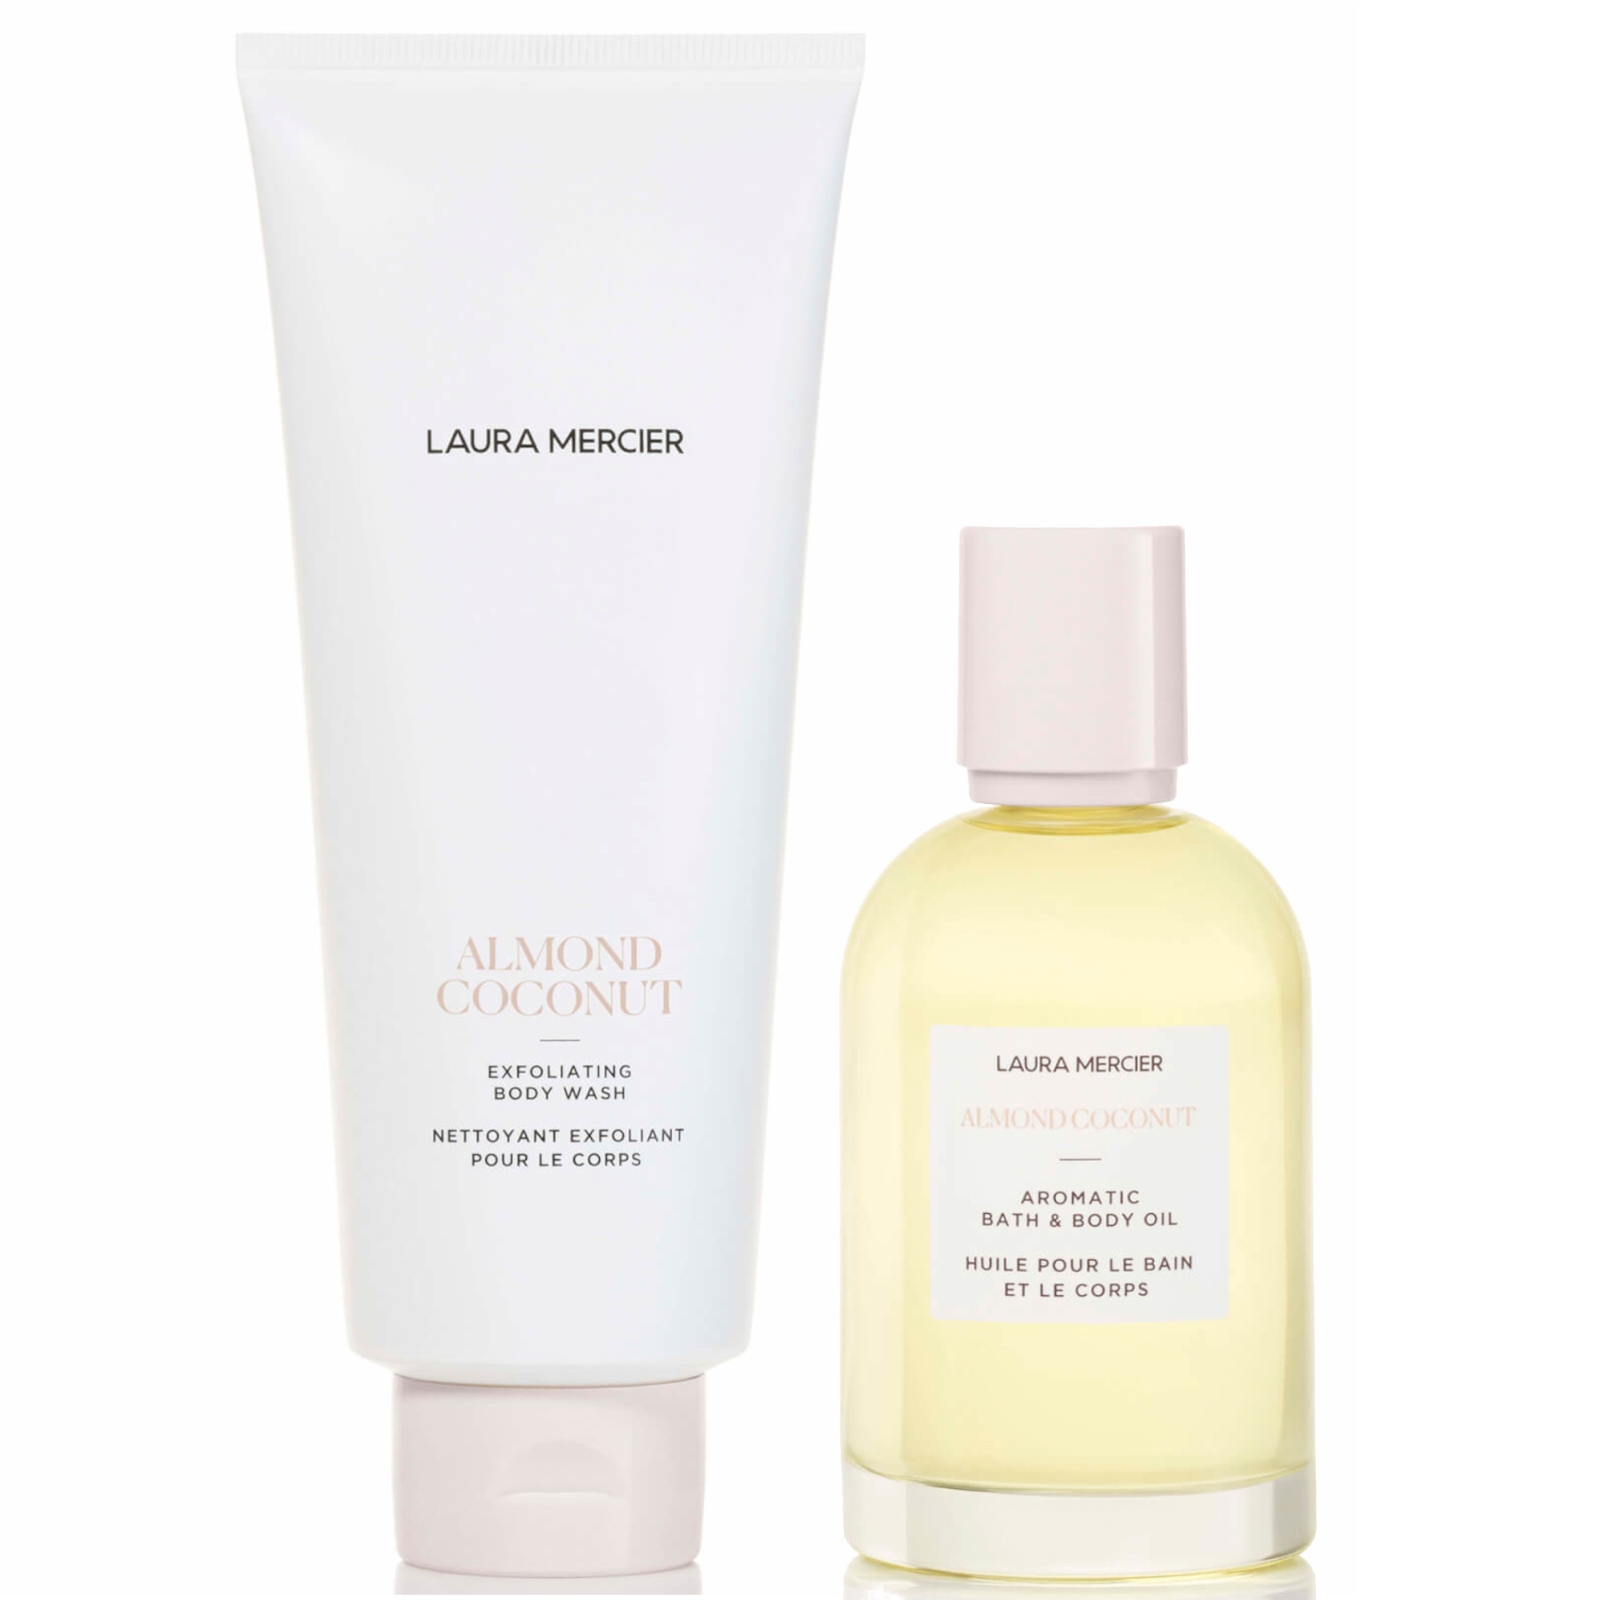 Image of Laura Mercier Almond Coconut Exfoliating Body Wash and Bath and Body Oil Bundle